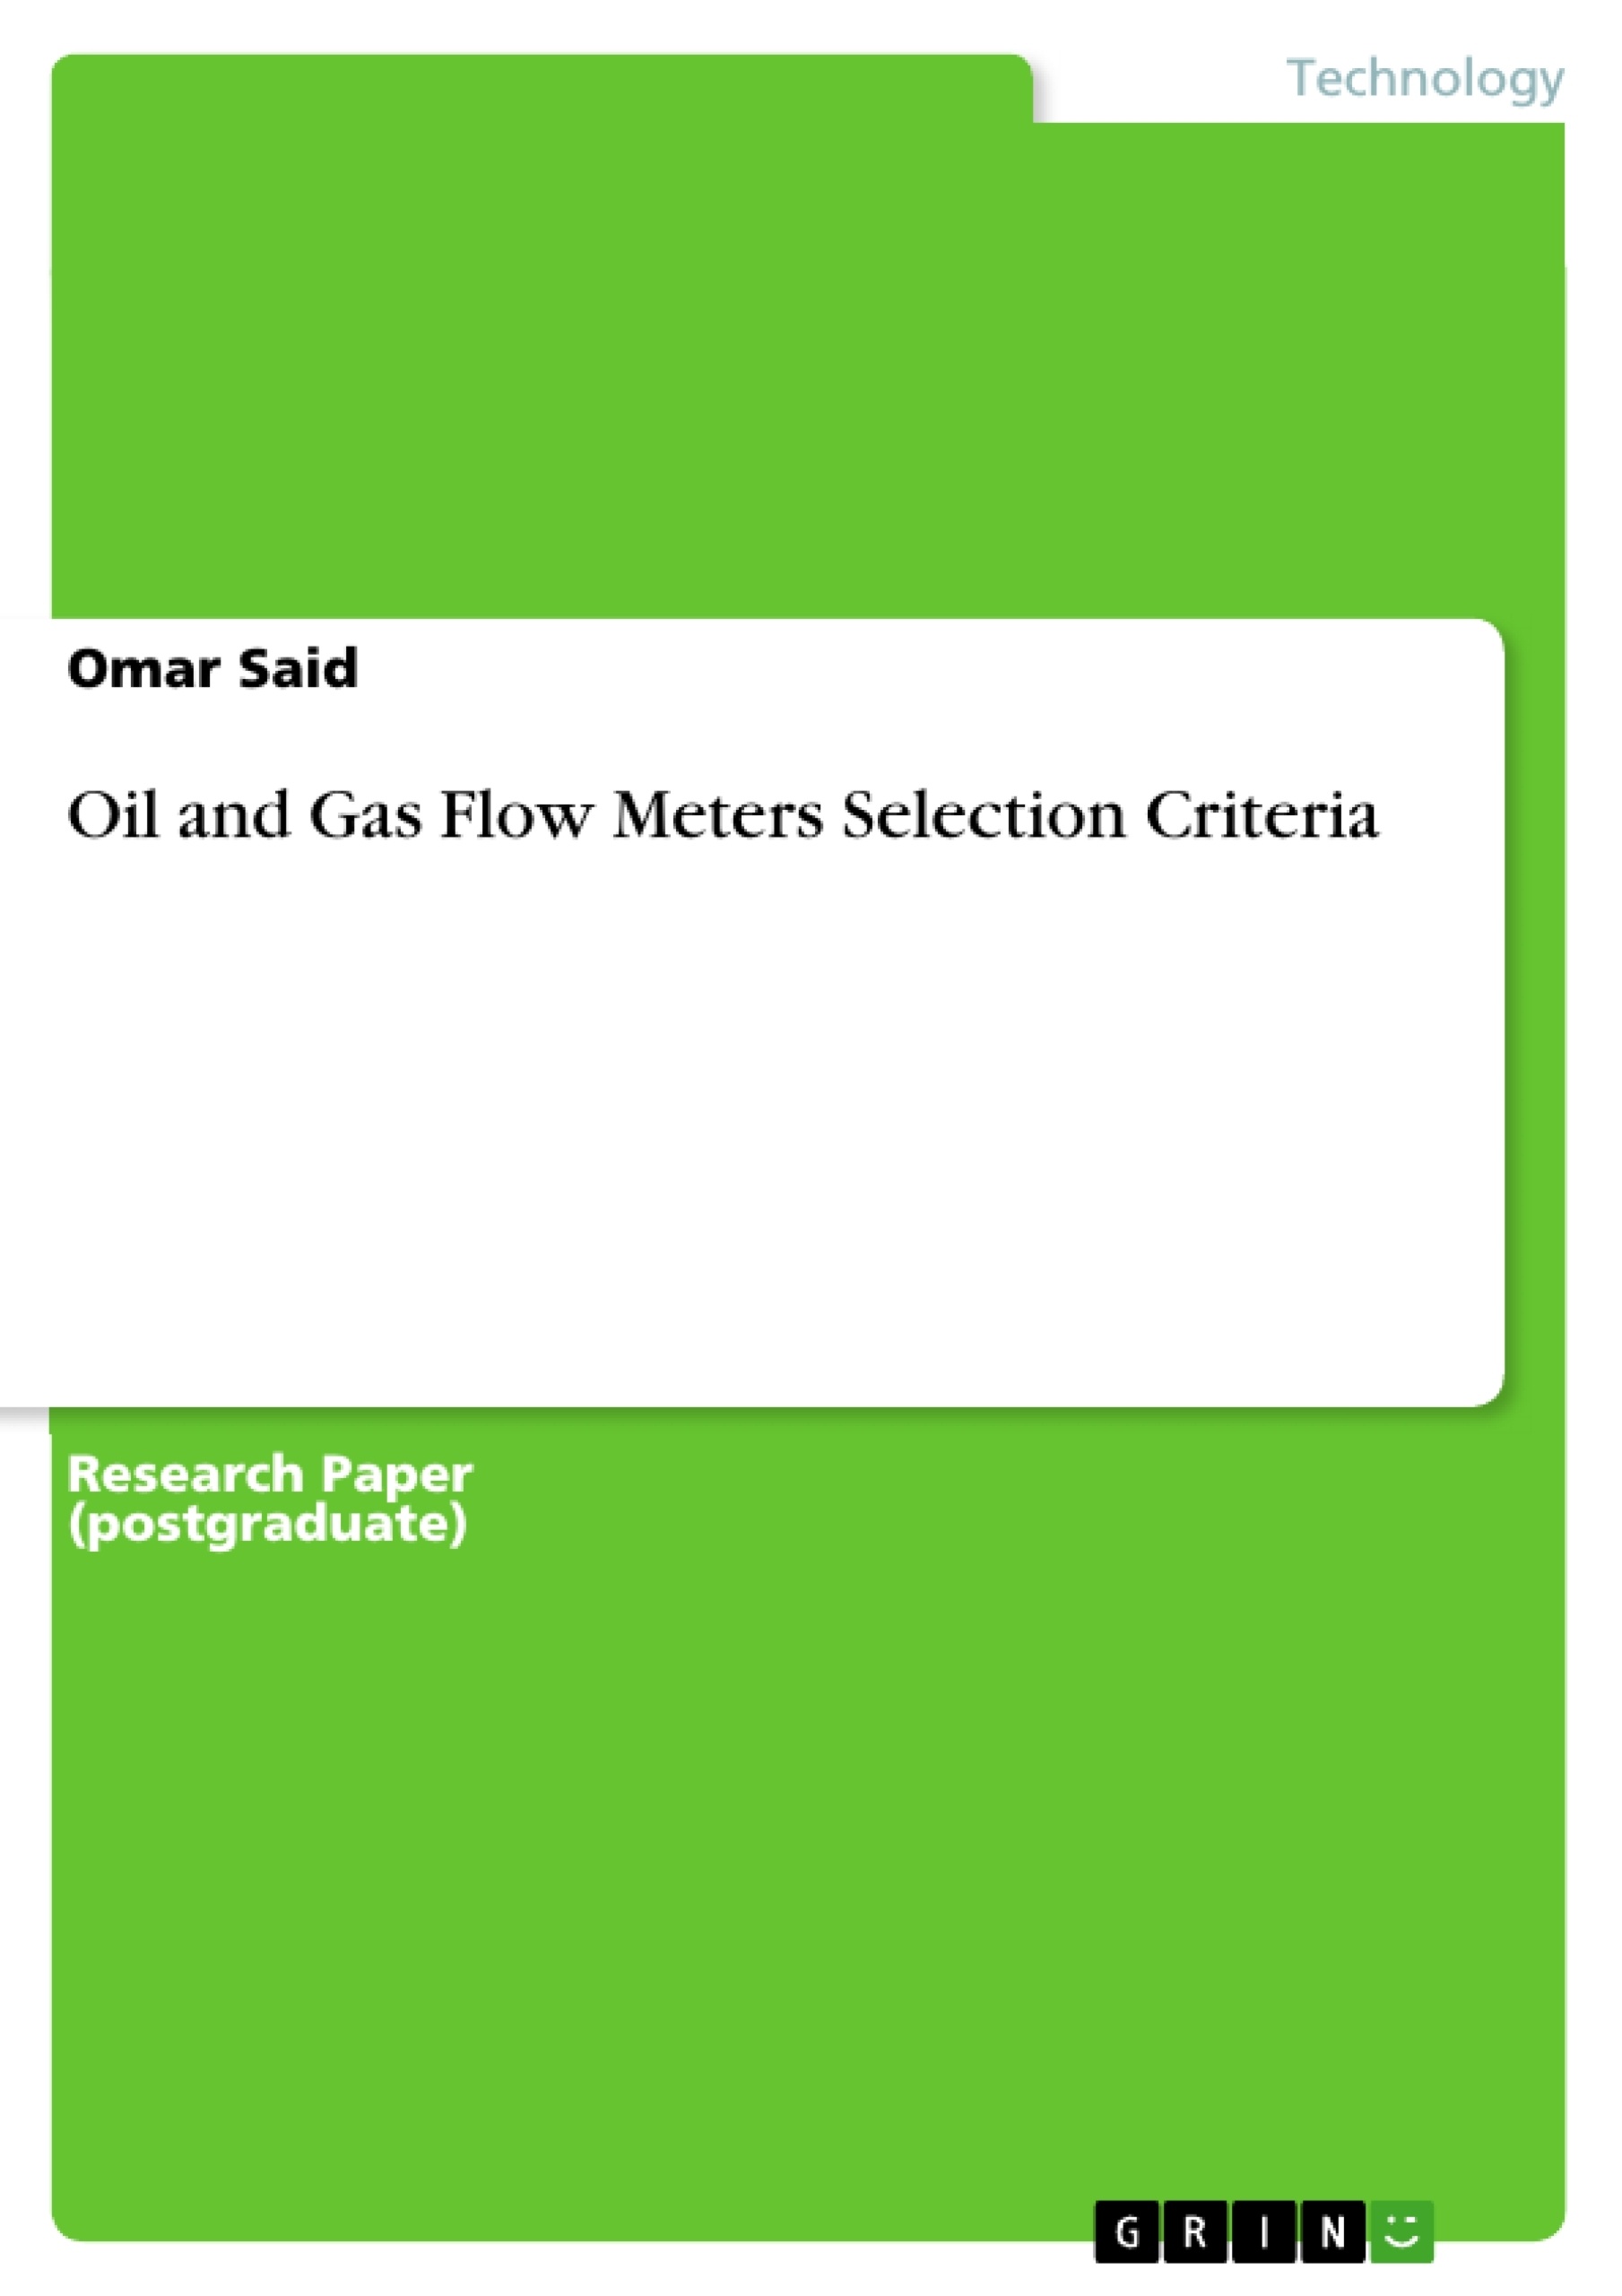 Título: Oil and Gas Flow Meters Selection Criteria